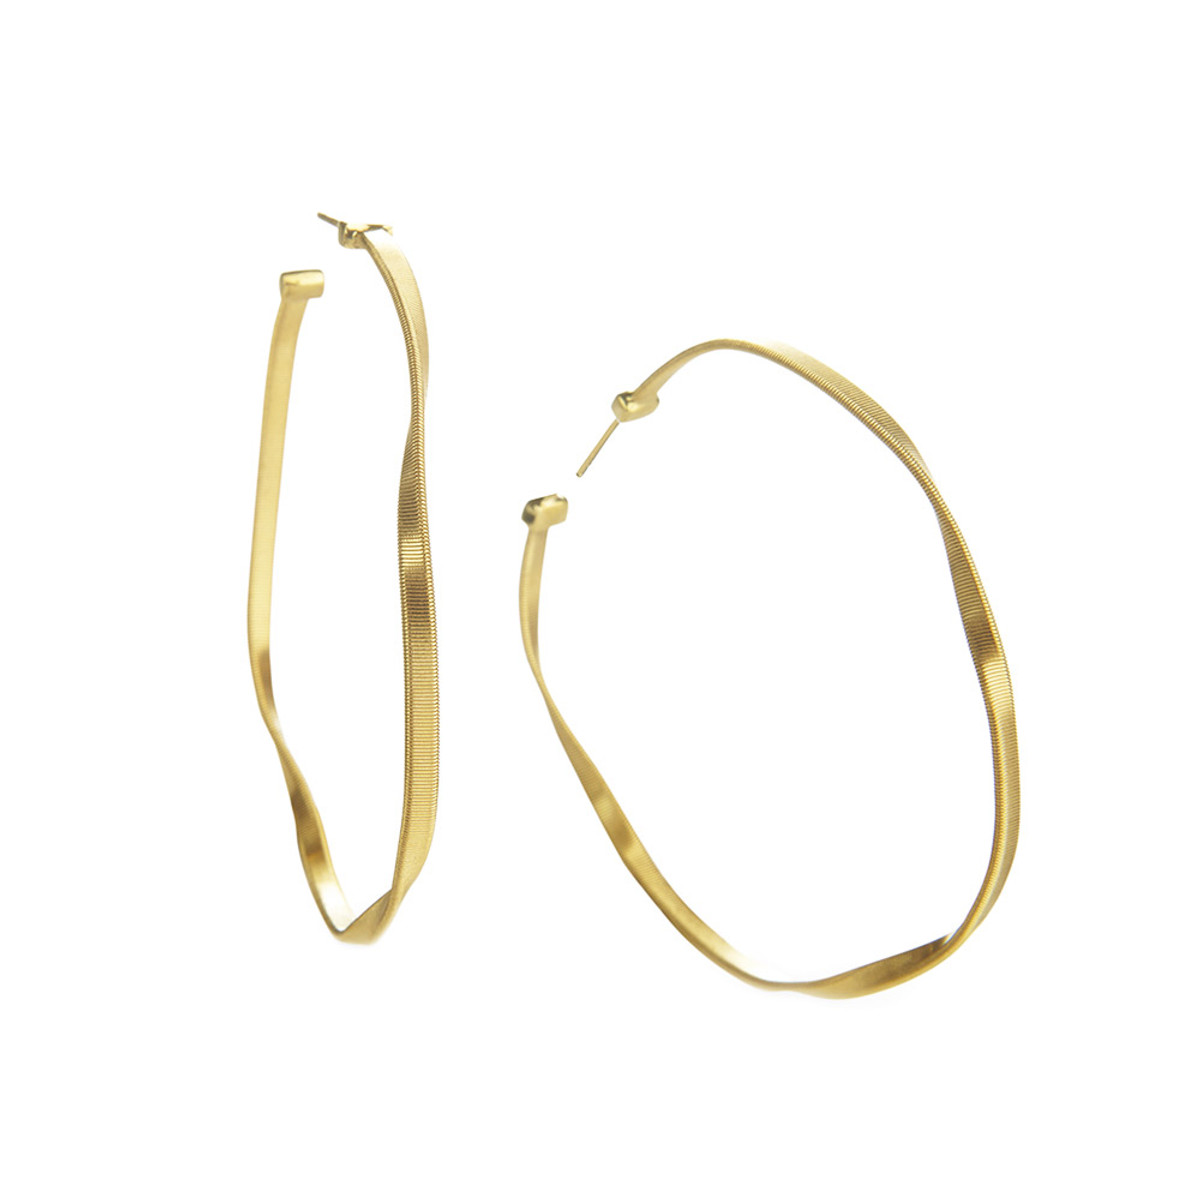 Marco Bicego Marrakech 18K Yellow Gold Large Hoop Earrings-JER181714 Product Image